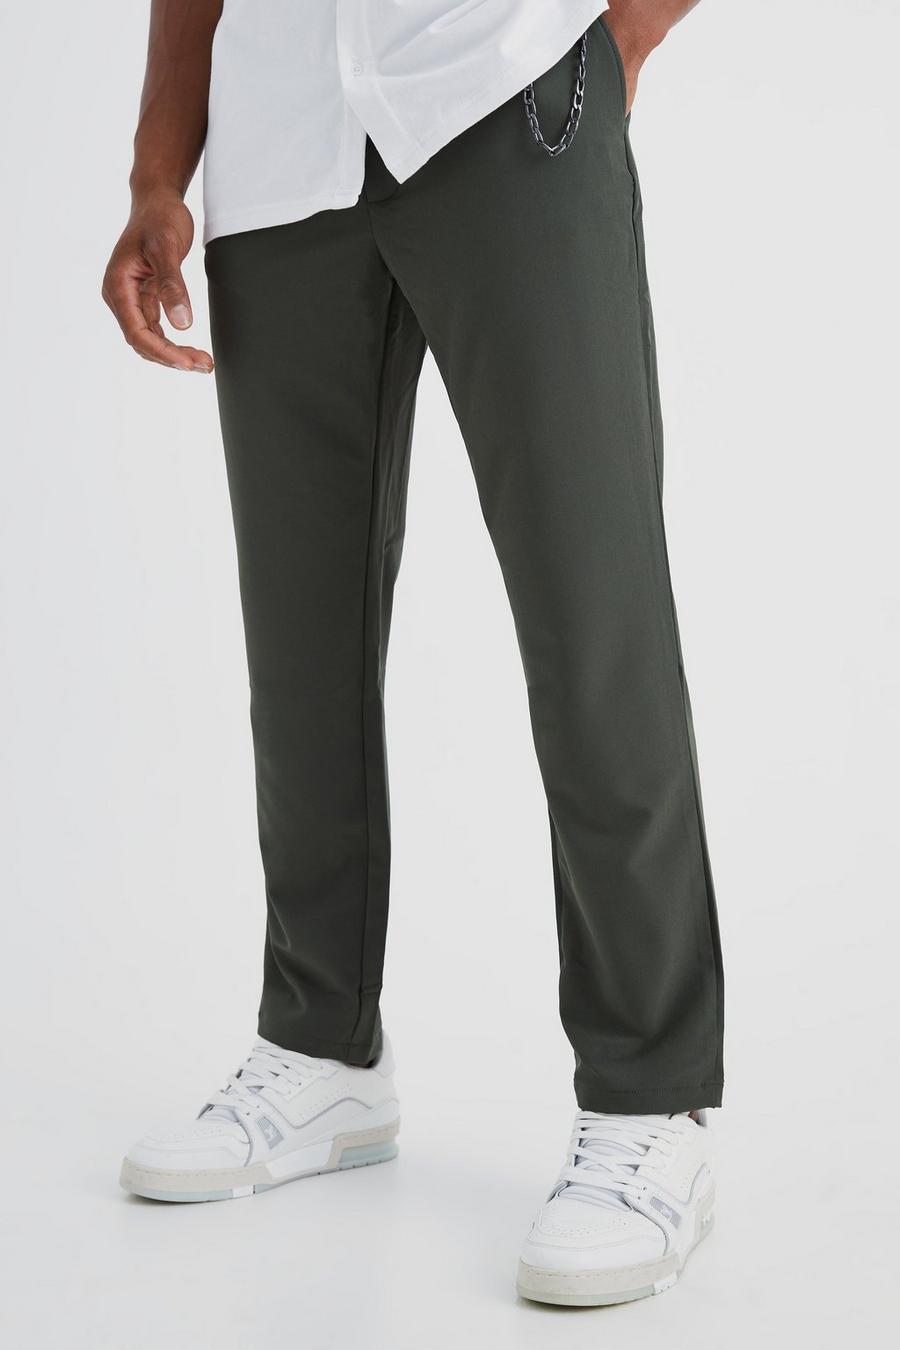 Khaki Elasticated Slim Crop 4 Way Stretch Chain Trousers image number 1